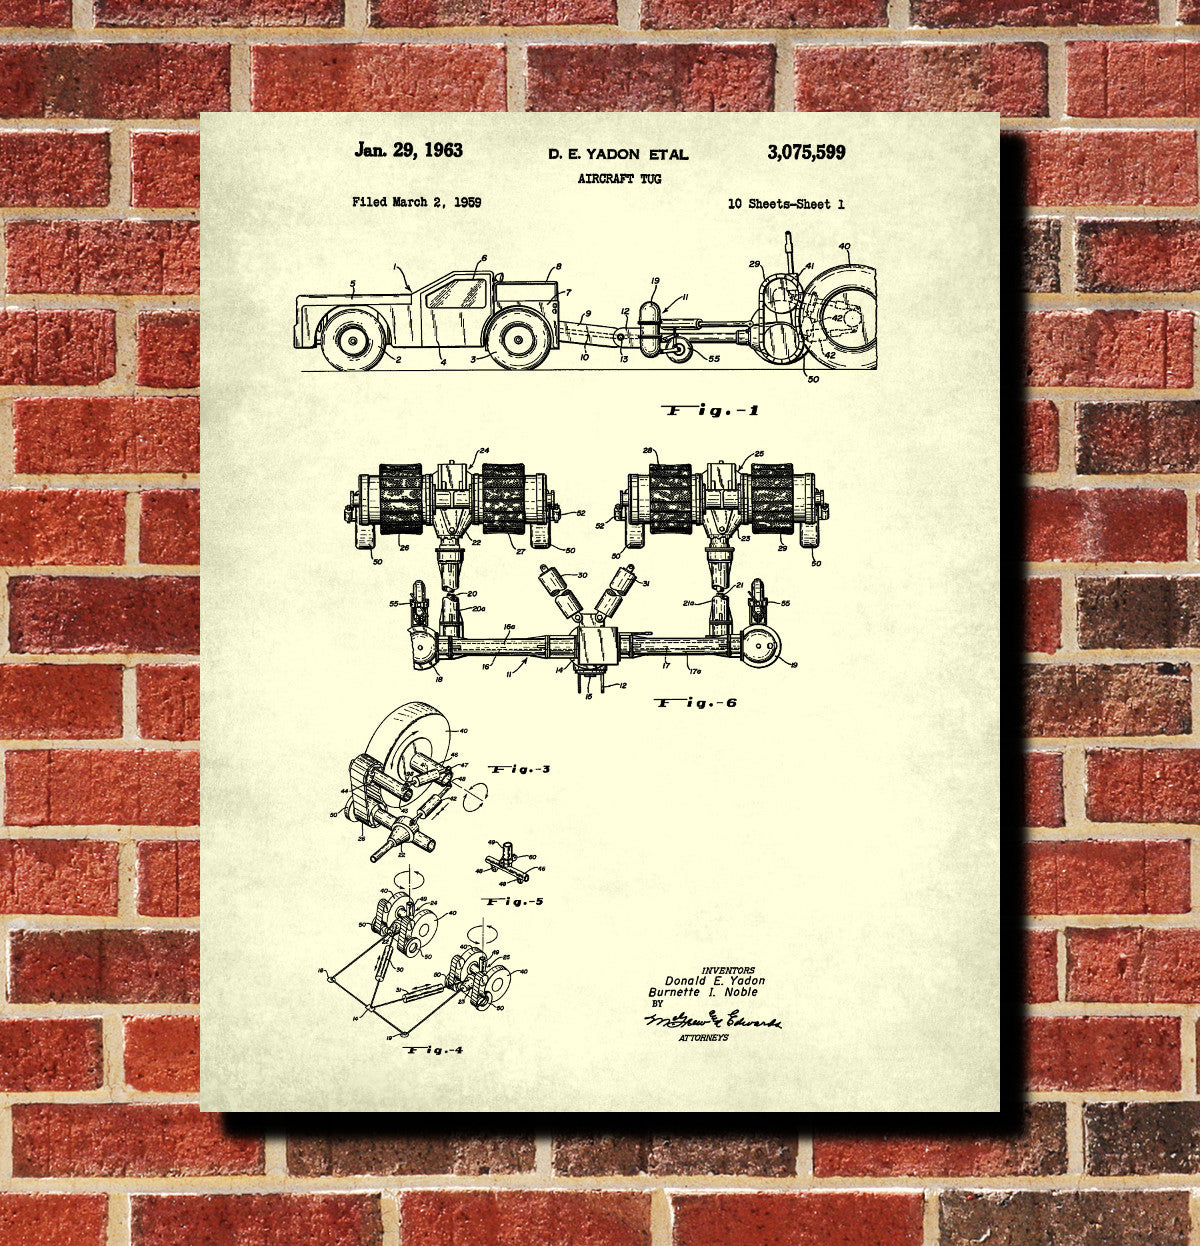 Aircraft Tug Patent Print Ground Crew Flying Poster